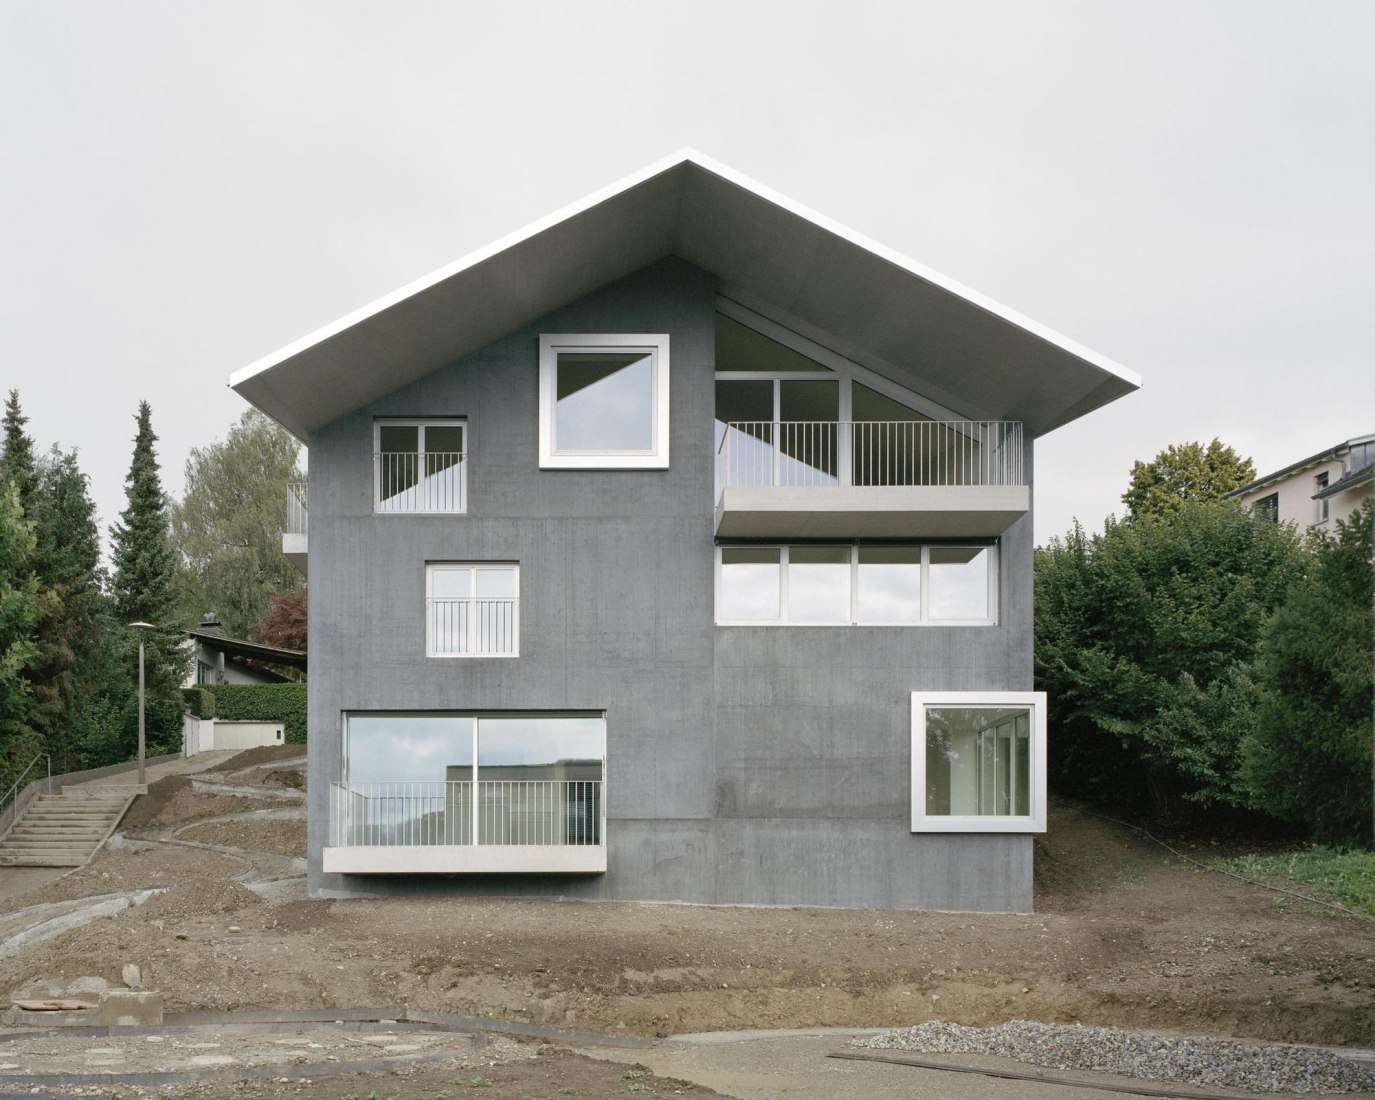 House on a slope by Karamuk Kuo. Photograph by Rory Gardiner